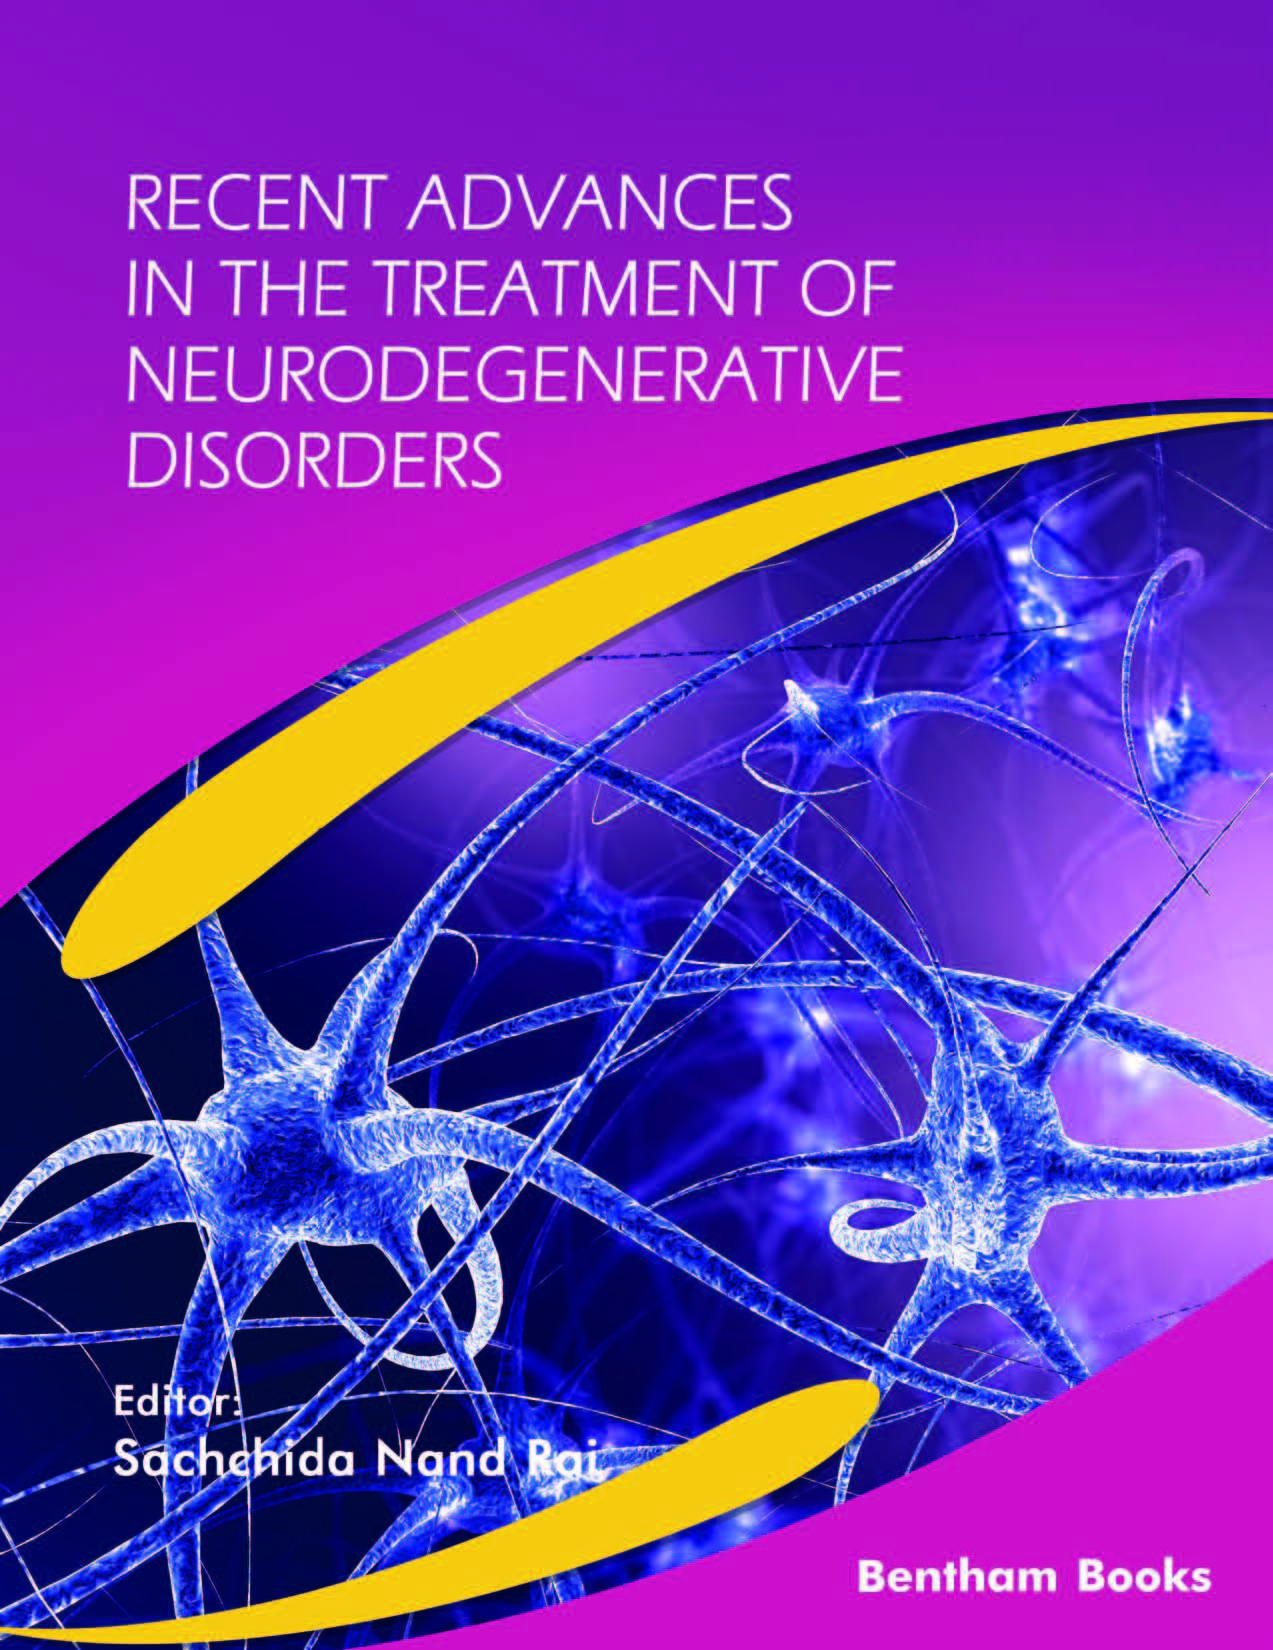 Recent Advances in the Treatment of Neurodegenerative Disorders